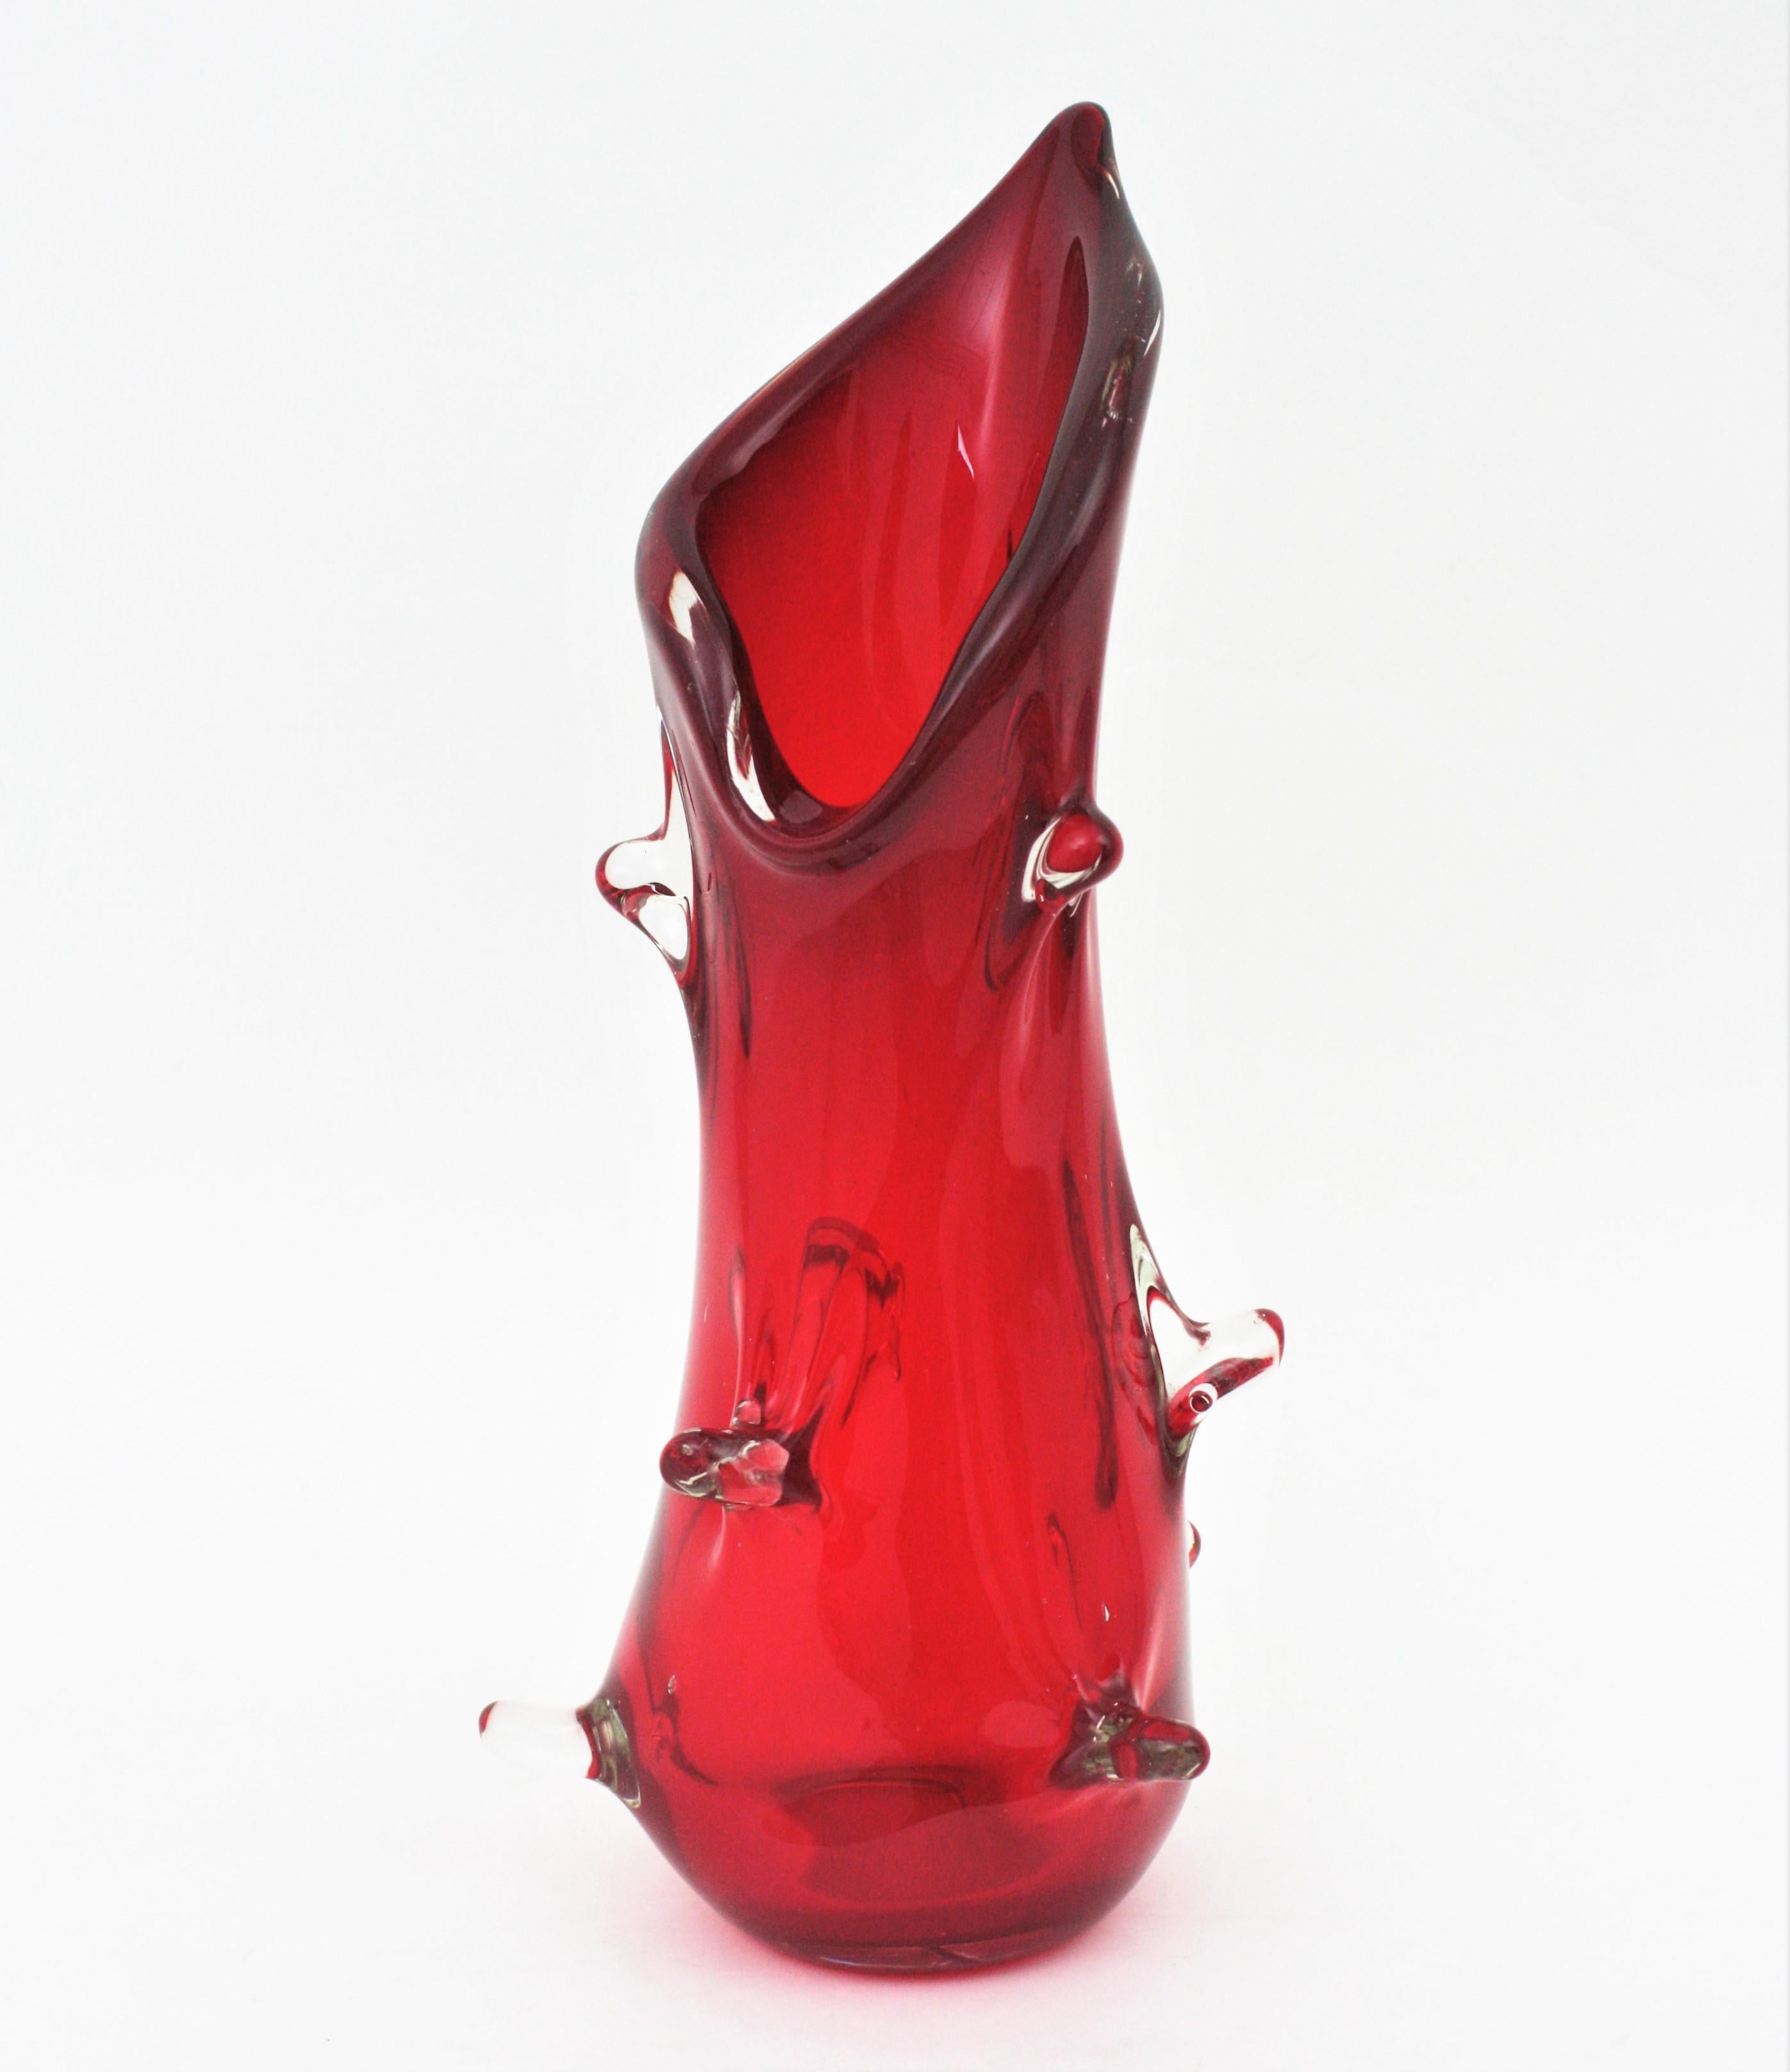 Murano Glass iridiscent Pulled Art glass vase. Attributed to Archimede Seguso, Italy, 1960s
An spectacular handblown Murano art glass vase in a vibrant ruby red with pulled details thorough. Very attractive when light goes down on it.
This